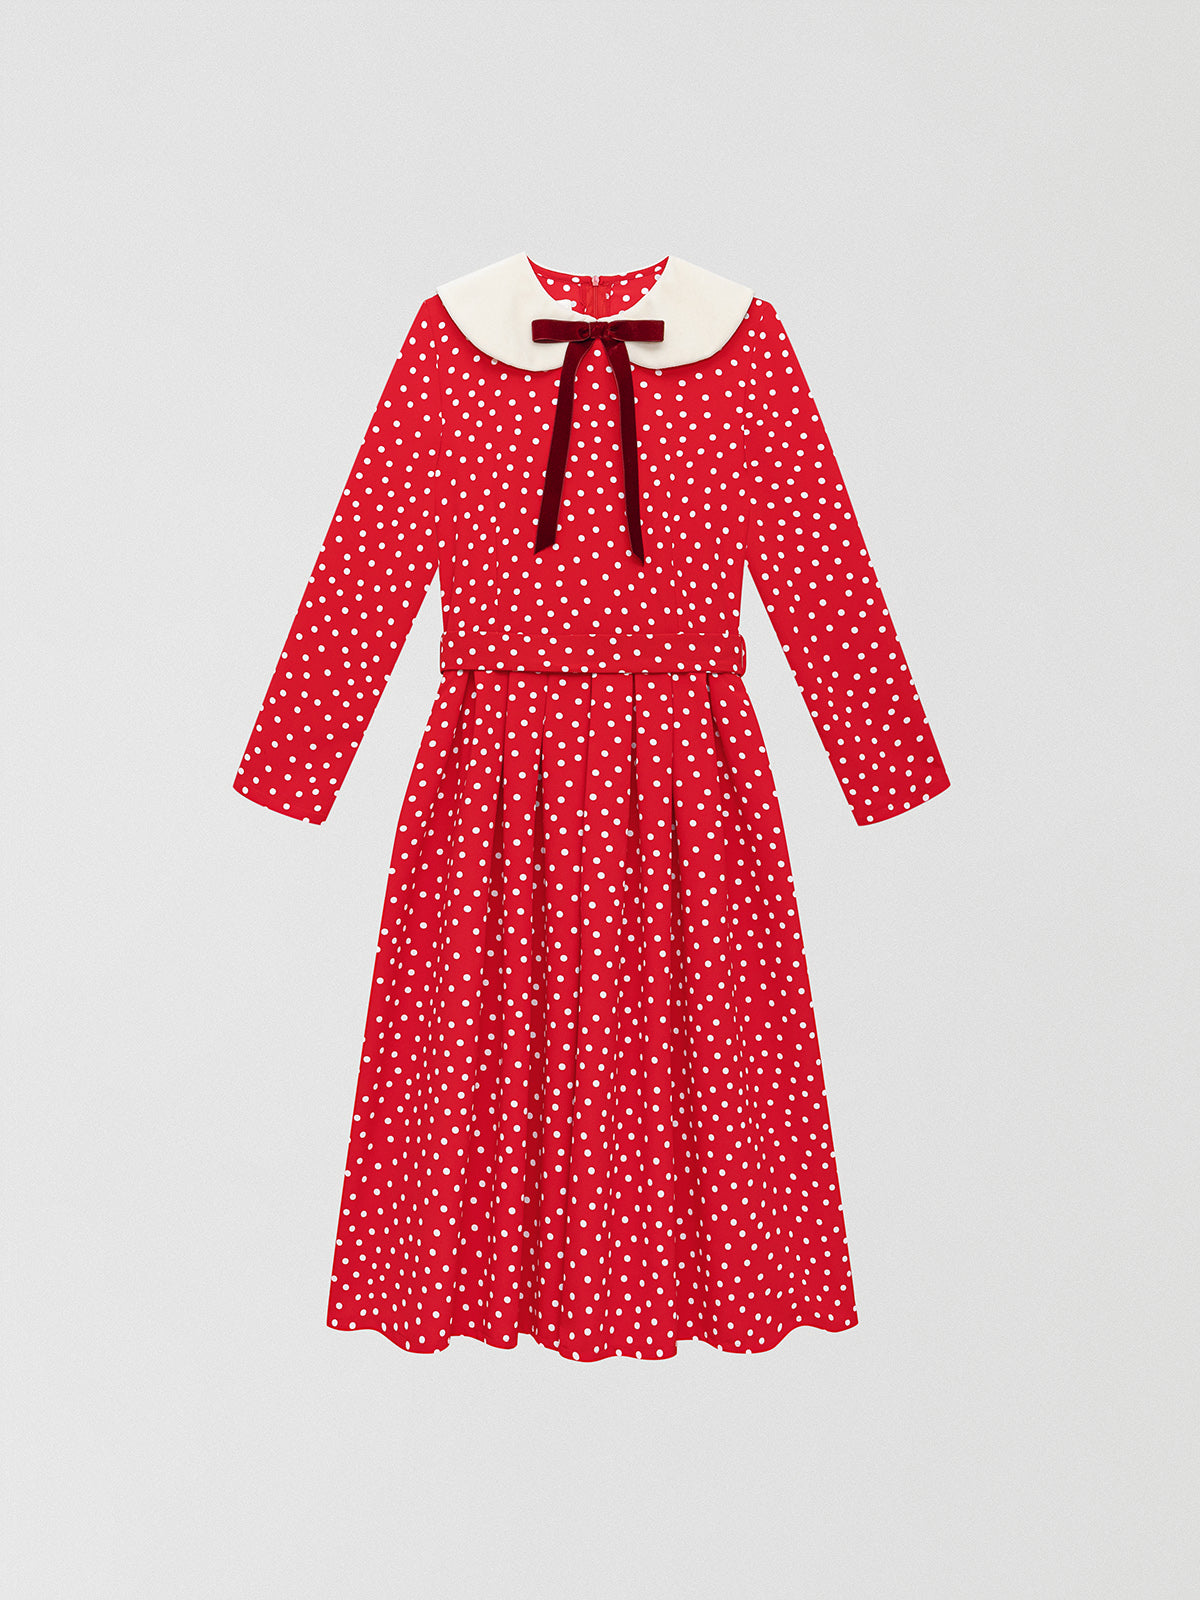 Color: Red/White.  Red blue and white polka dots dress made of cotton with velvet baby collar in ecru.   Regular fit. Midi length. Waistband with sash lined in the same fabric.  Flared skirt. Round neck made in ecru velvet with burgundy velvet bow closure in the center.  Long sleeves. Zipper closure at the back.